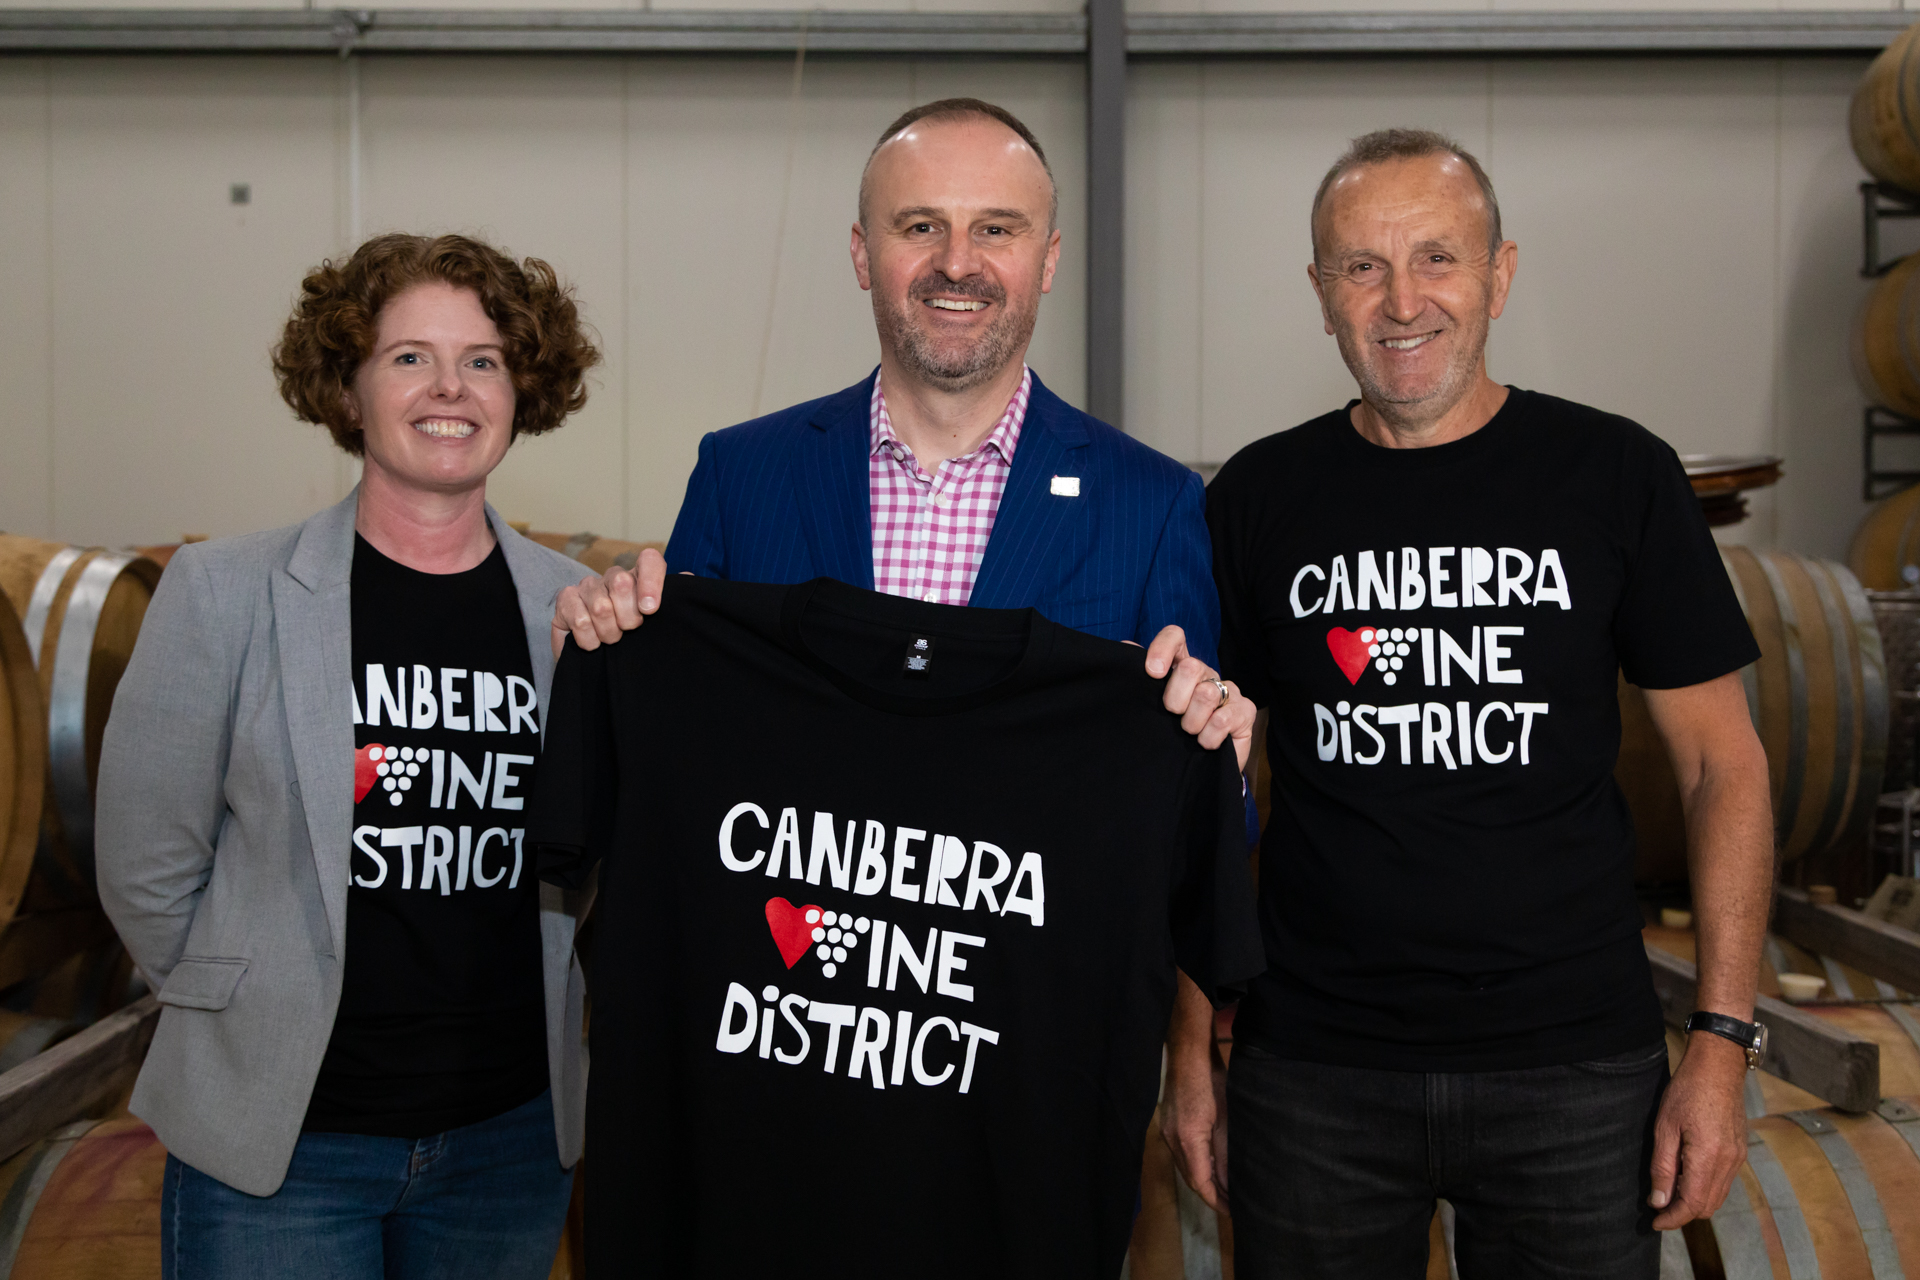 Made with love: Canberra Wine District tells the world it's personal